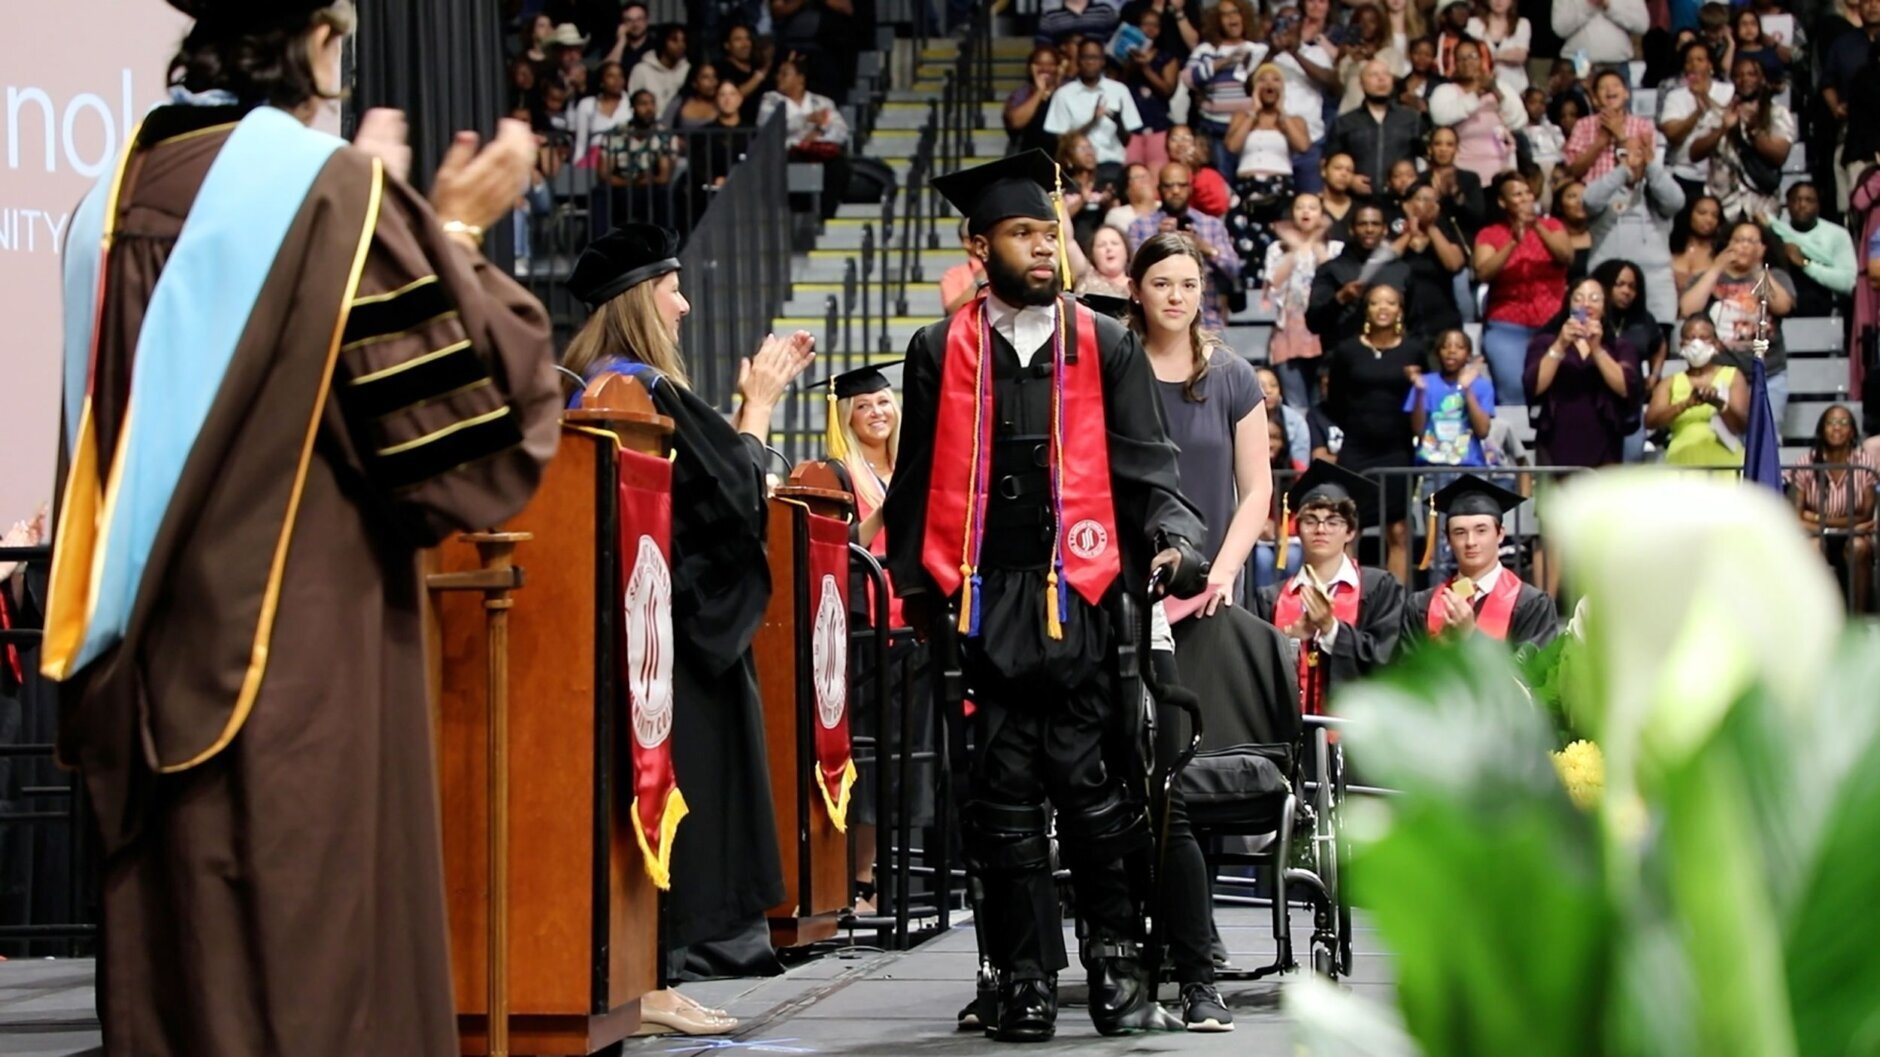 Khalil Watson uses an exoskeleton to stand and walk at his college graduation ceremony years after he was shot and paralyzed from the neck down.